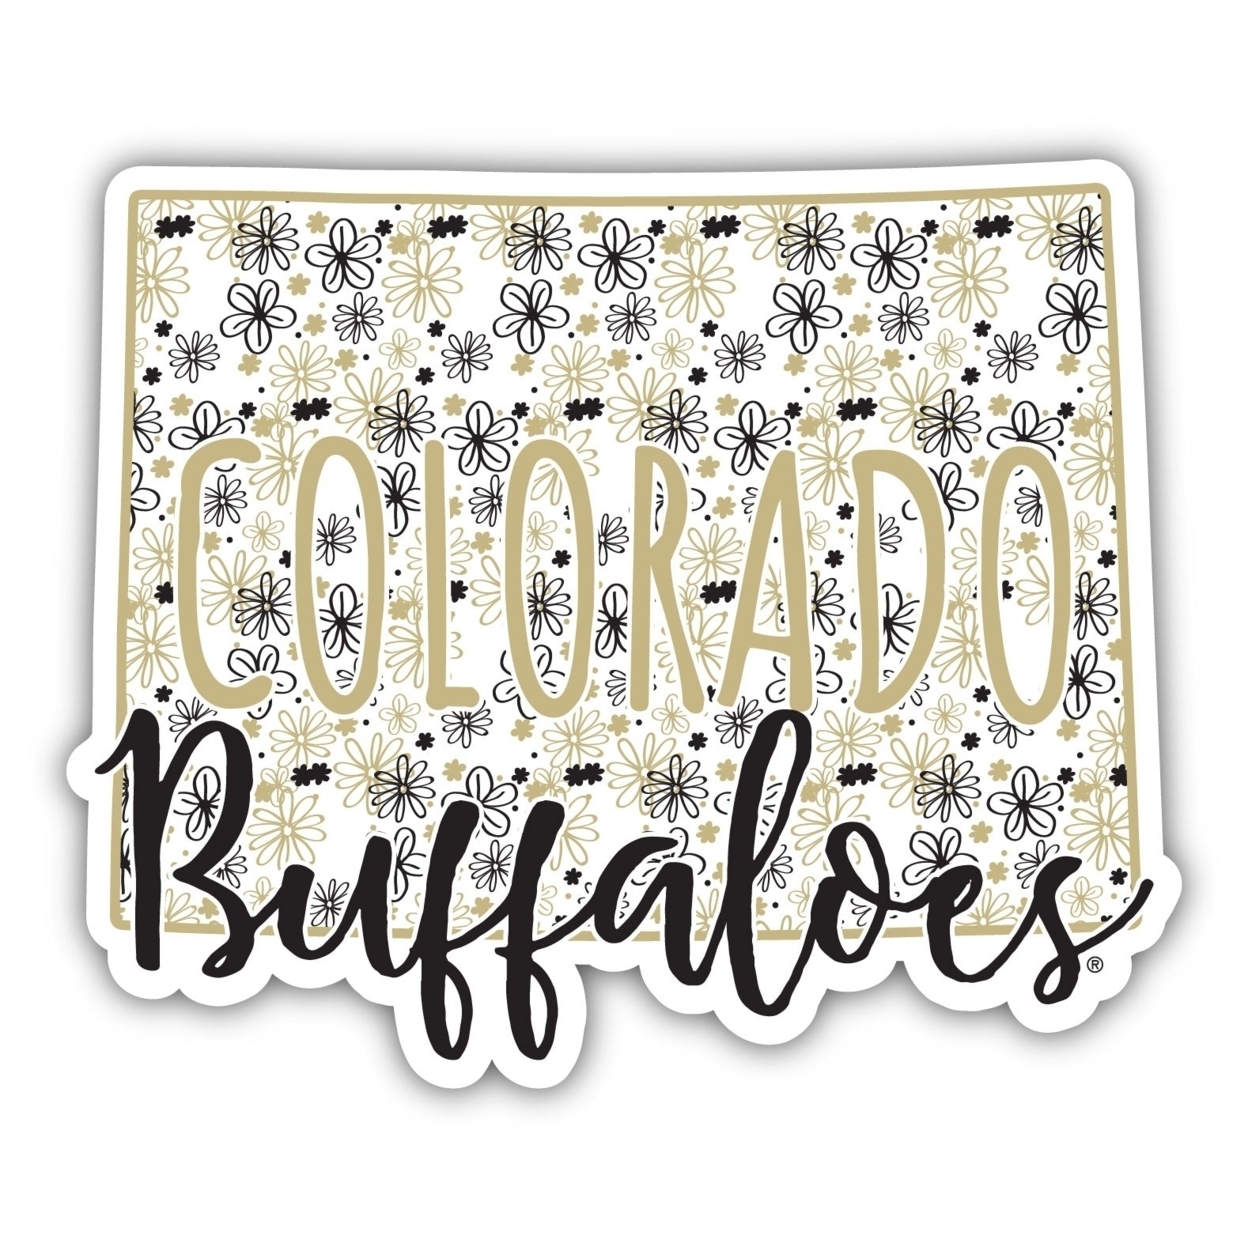 Colorado Buffaloes Floral State Die Cut Decal 2-Inch